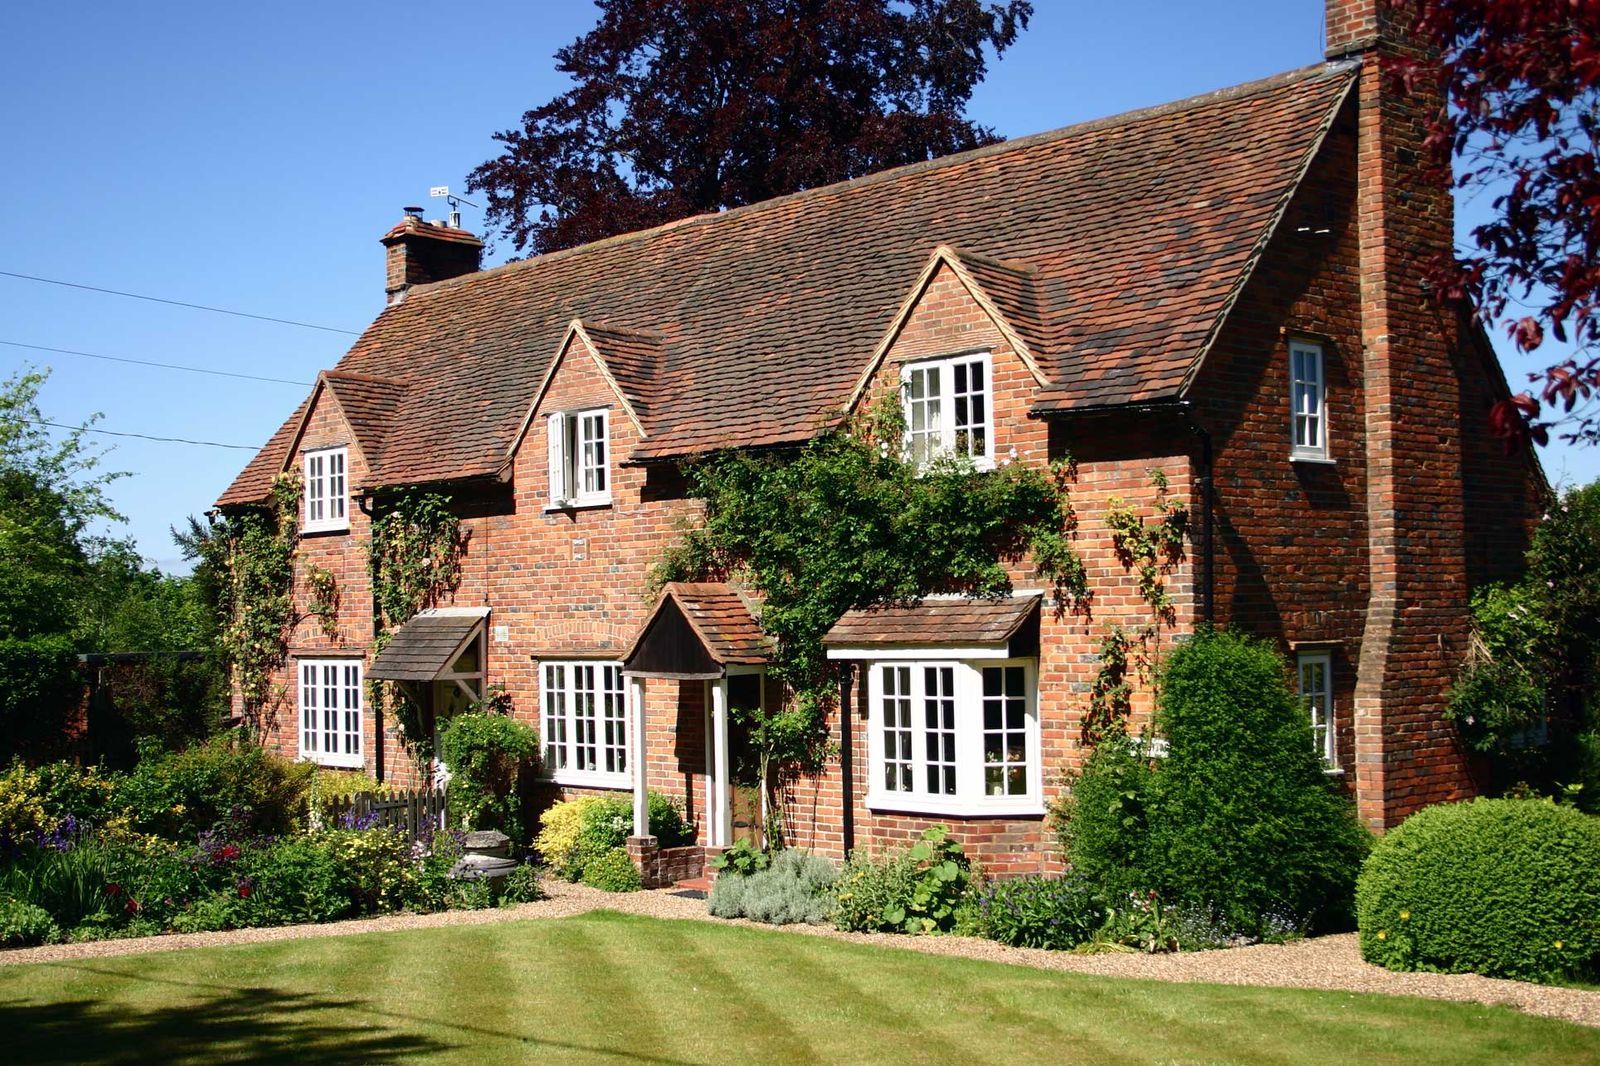 Selling a traditional Period Home can be complex